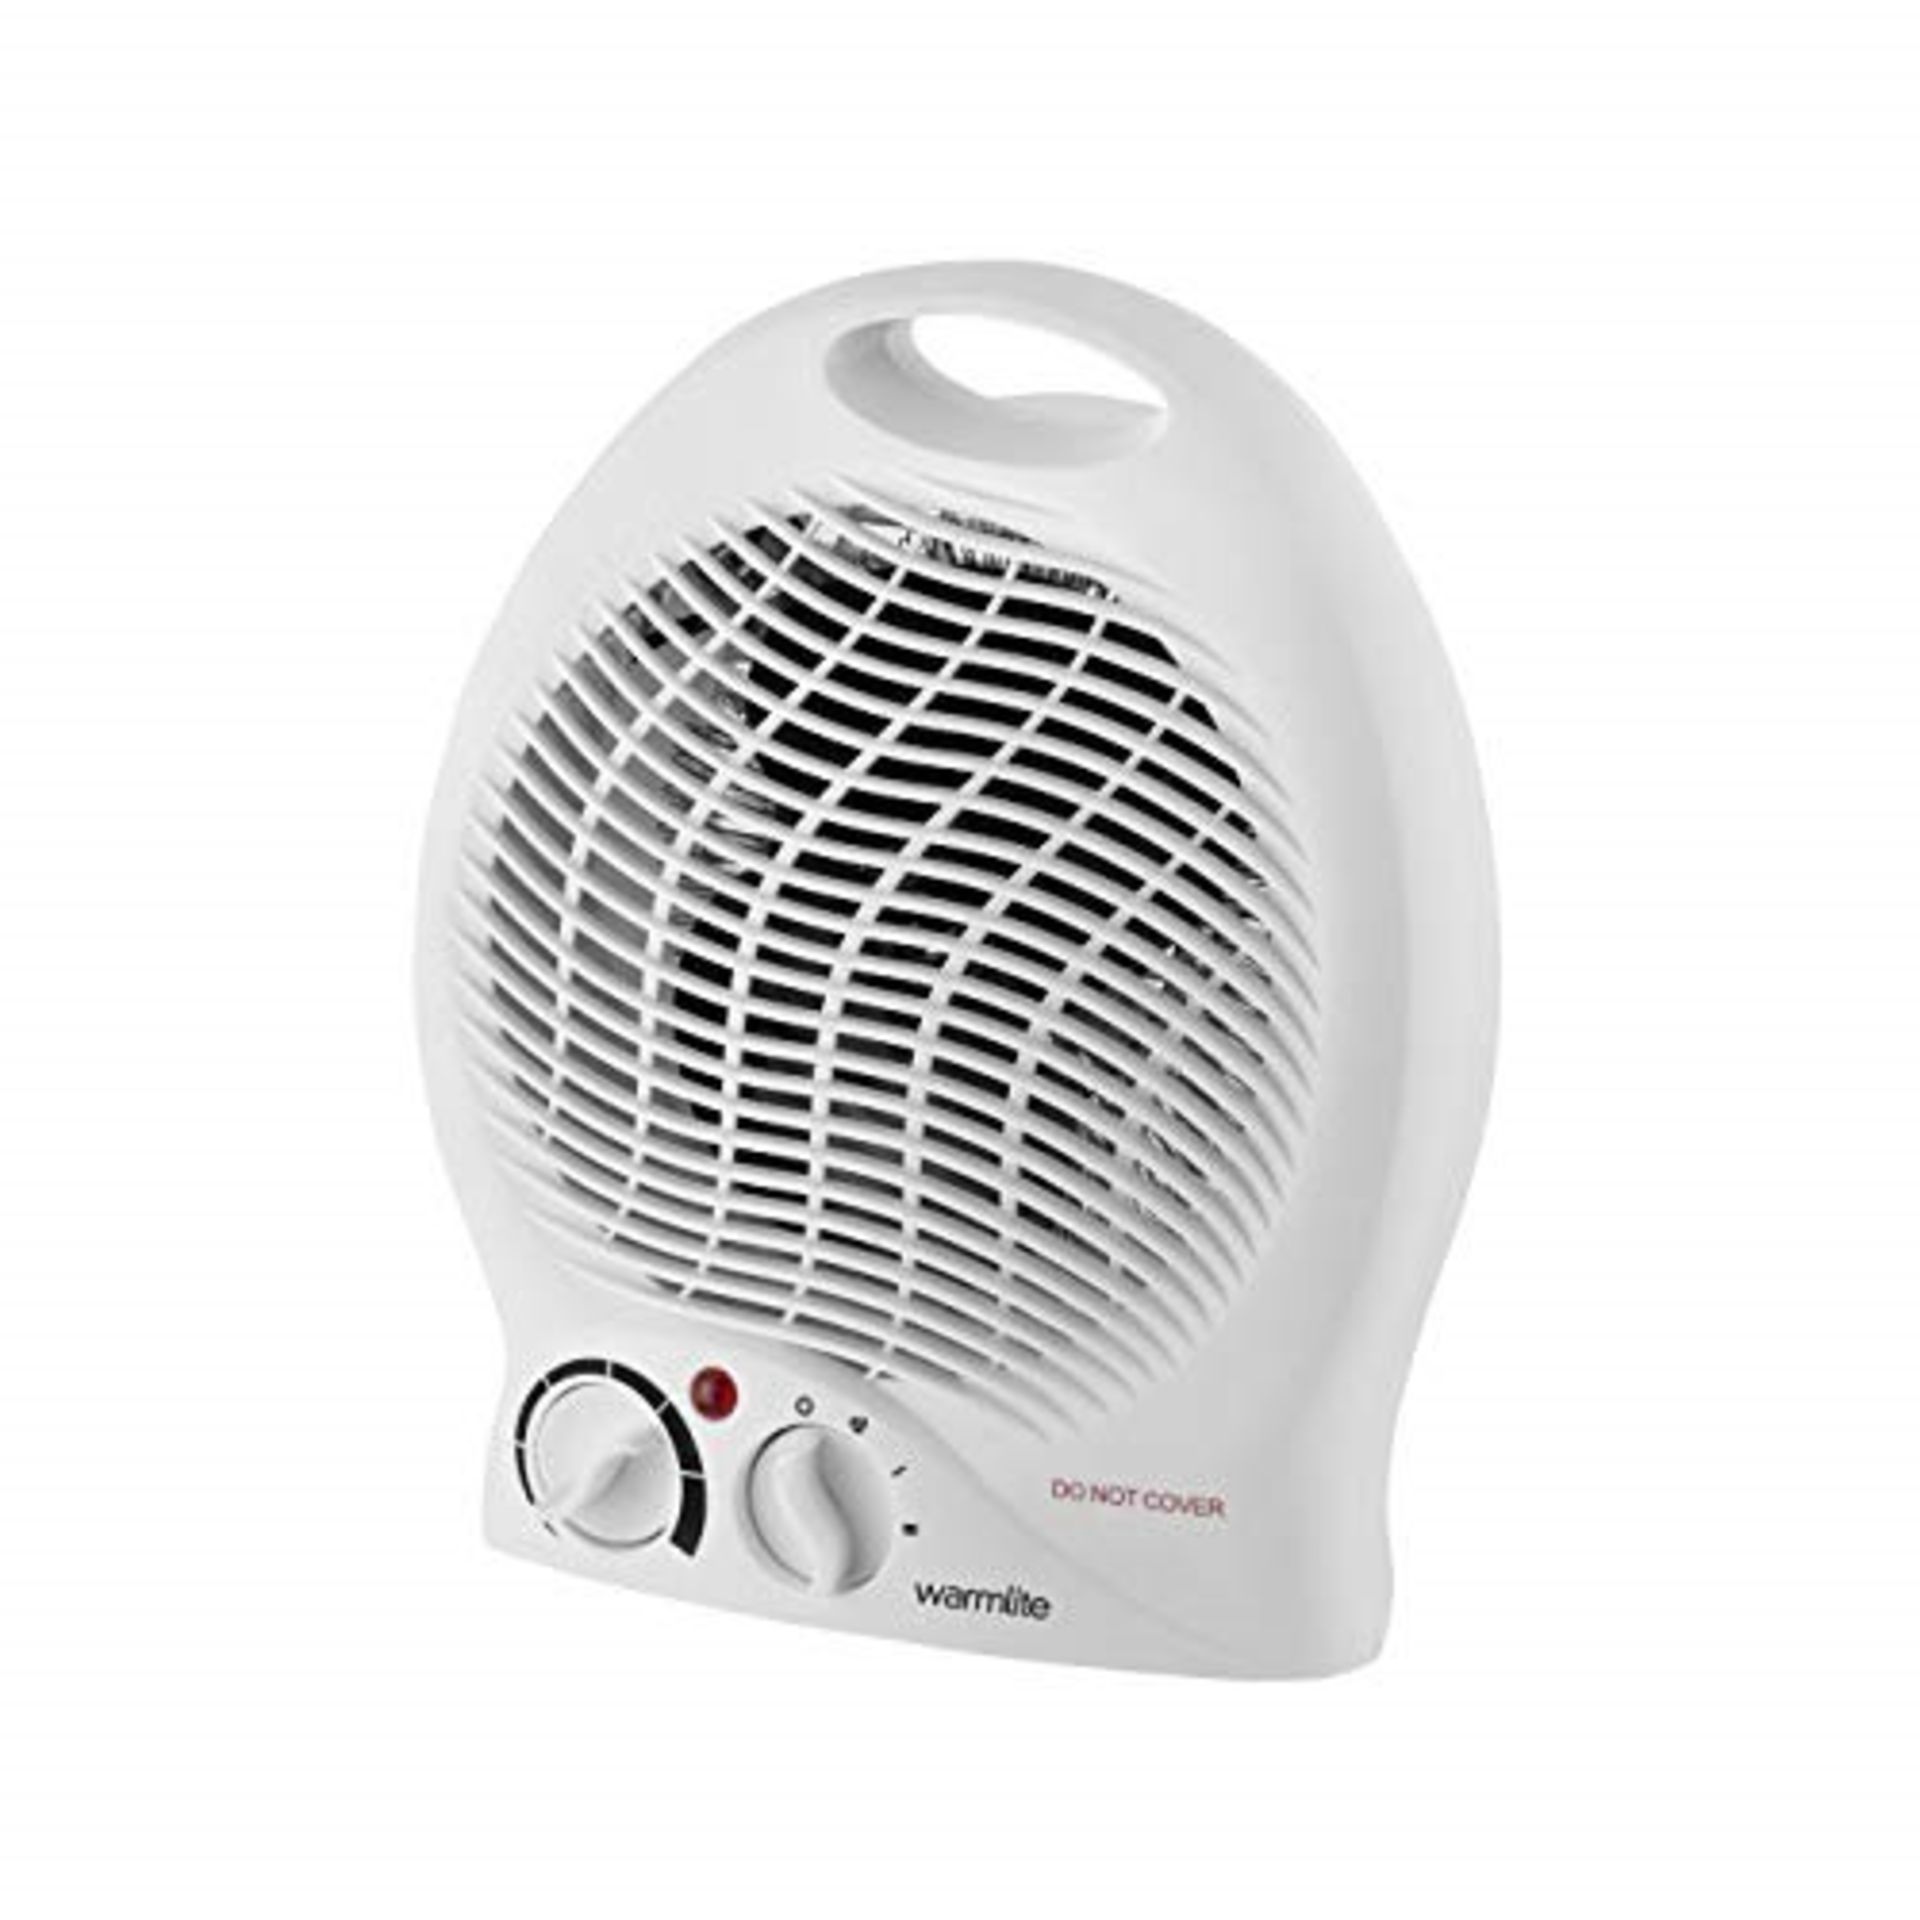 Warmlite WL44002 Thermo Fan Heater with 2 Heat Settings and Overheat Protection, 2000